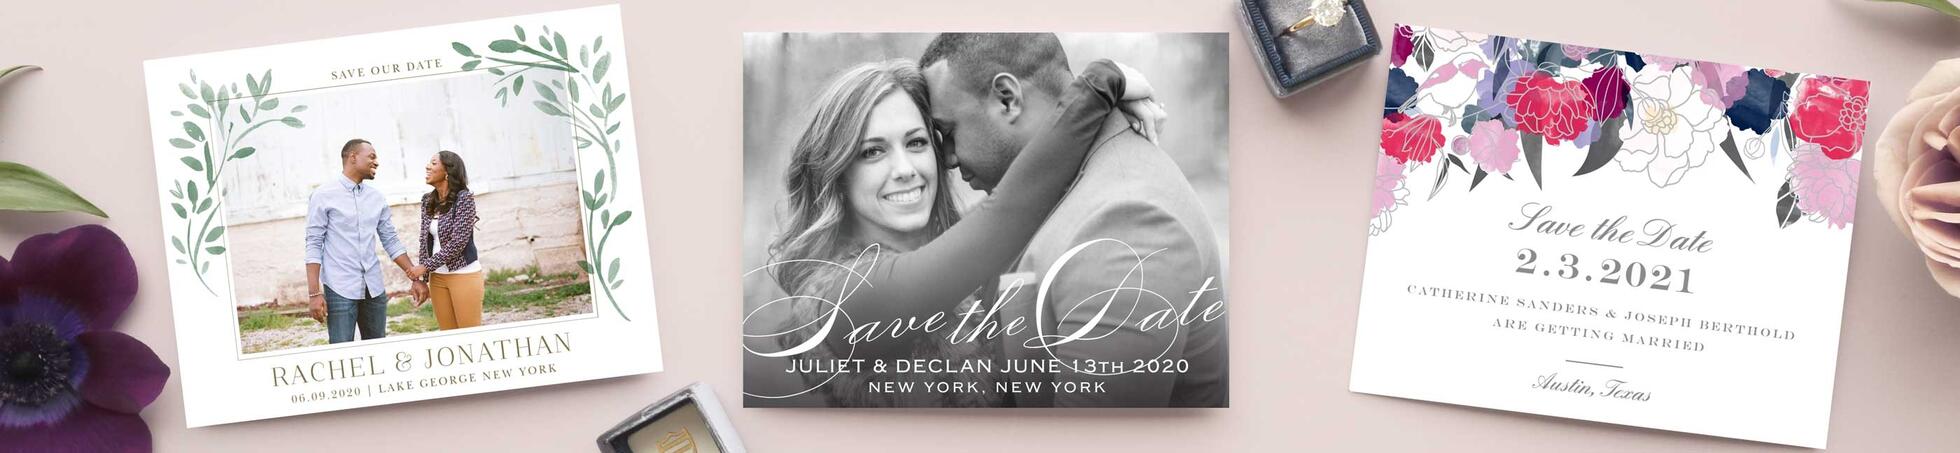 save-the-date-postcard-save-our-date-postcard-design-photo-save-the